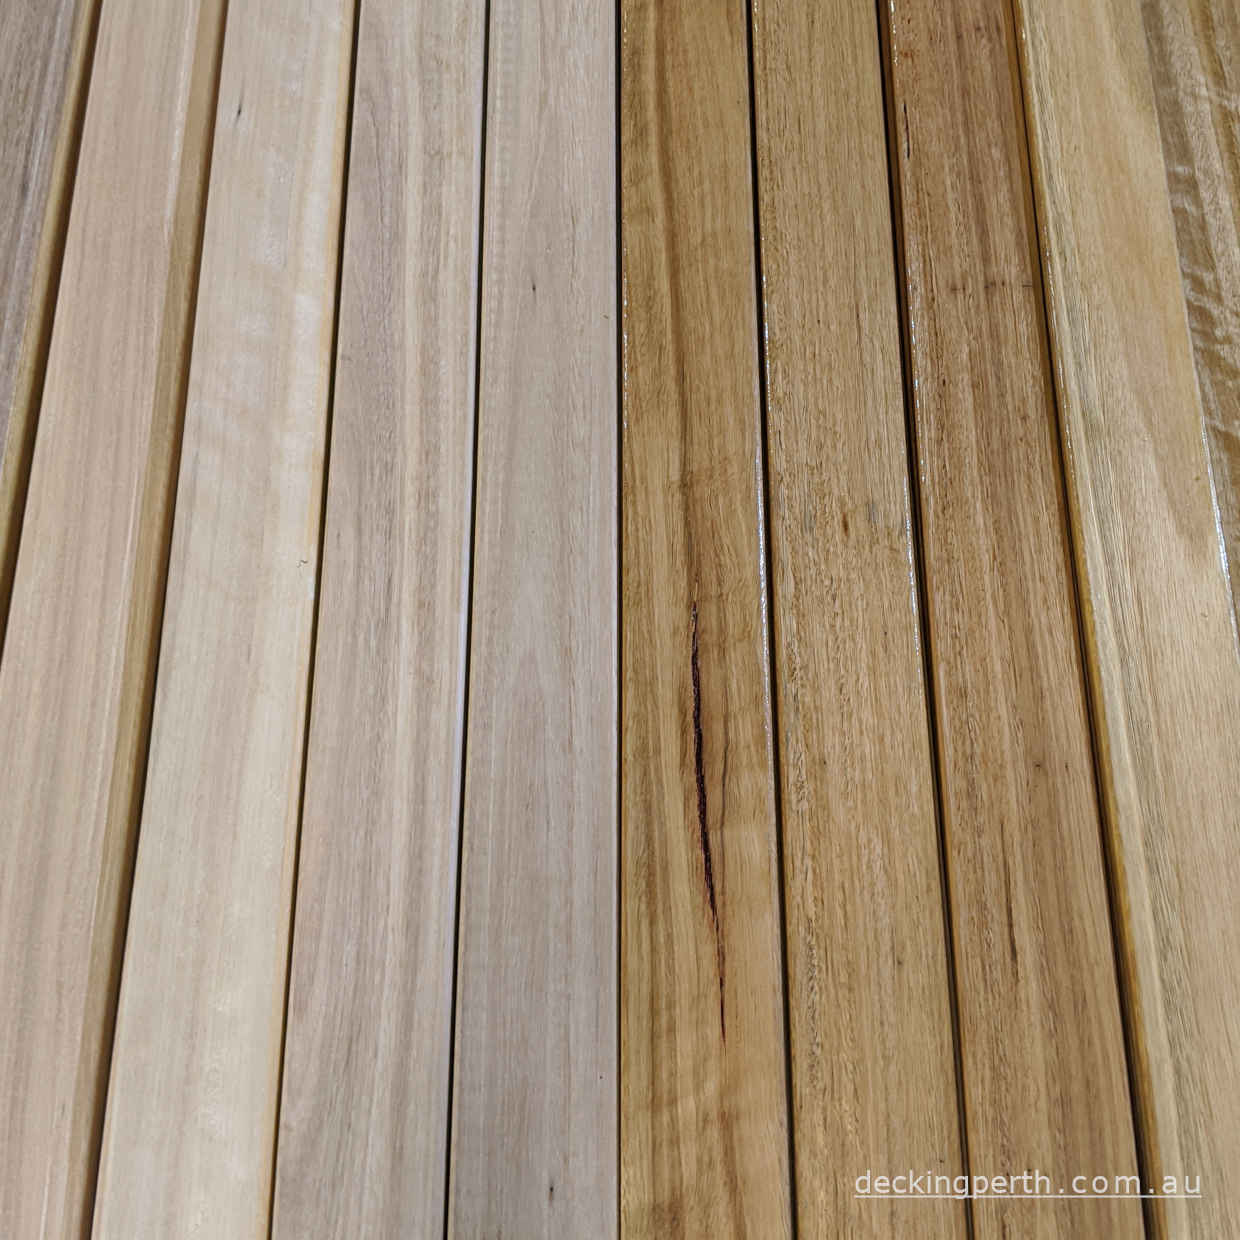 Pre-Oiled_Blackbutt_Timber_Decking_86mm_Decking_Perth with Cutek